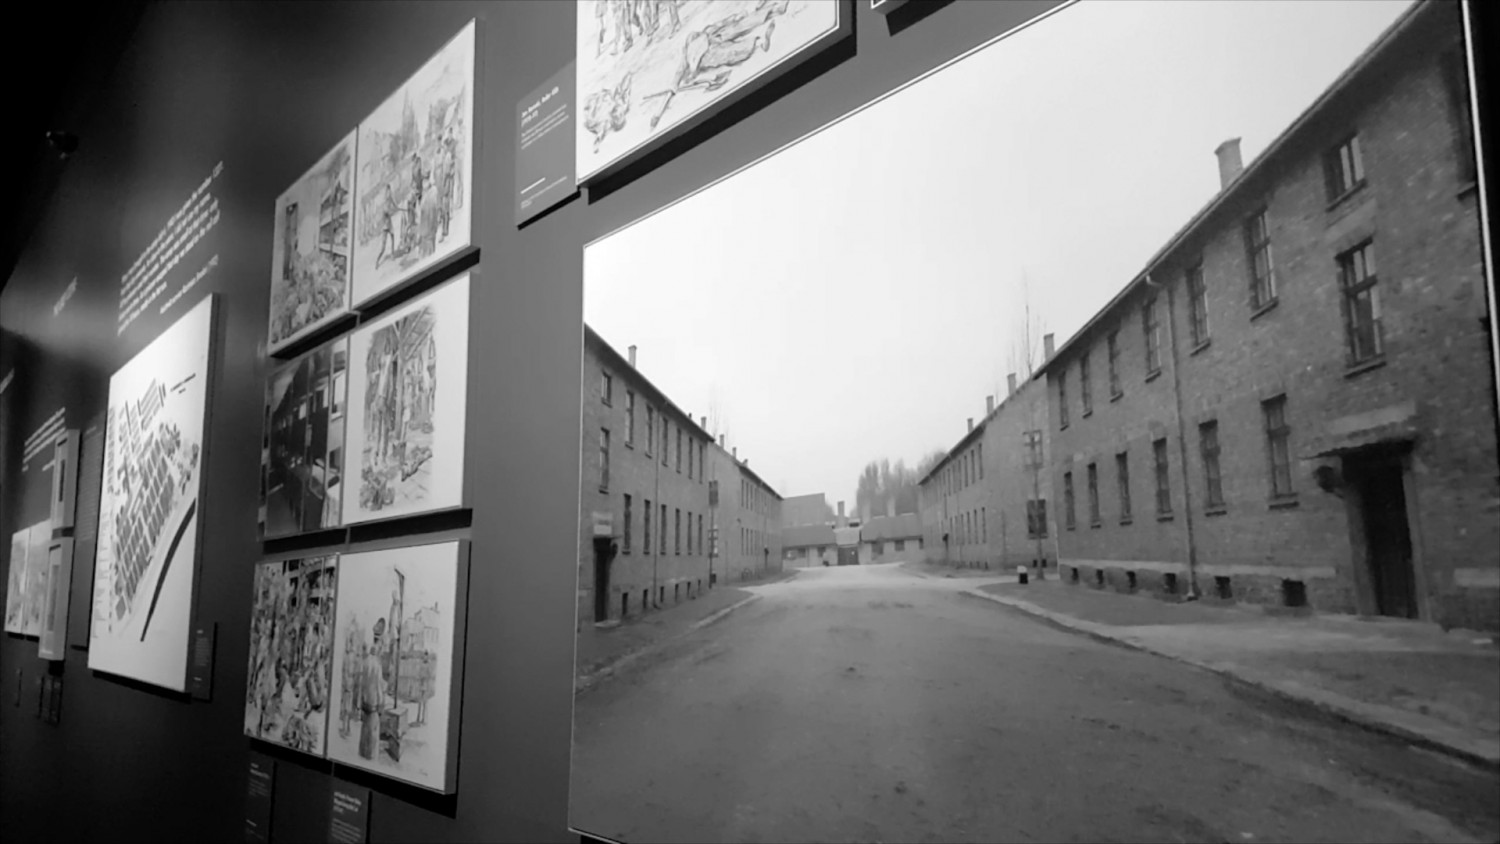 Auschwitz Exhibit Shows Perseverance of Holocaust Victims